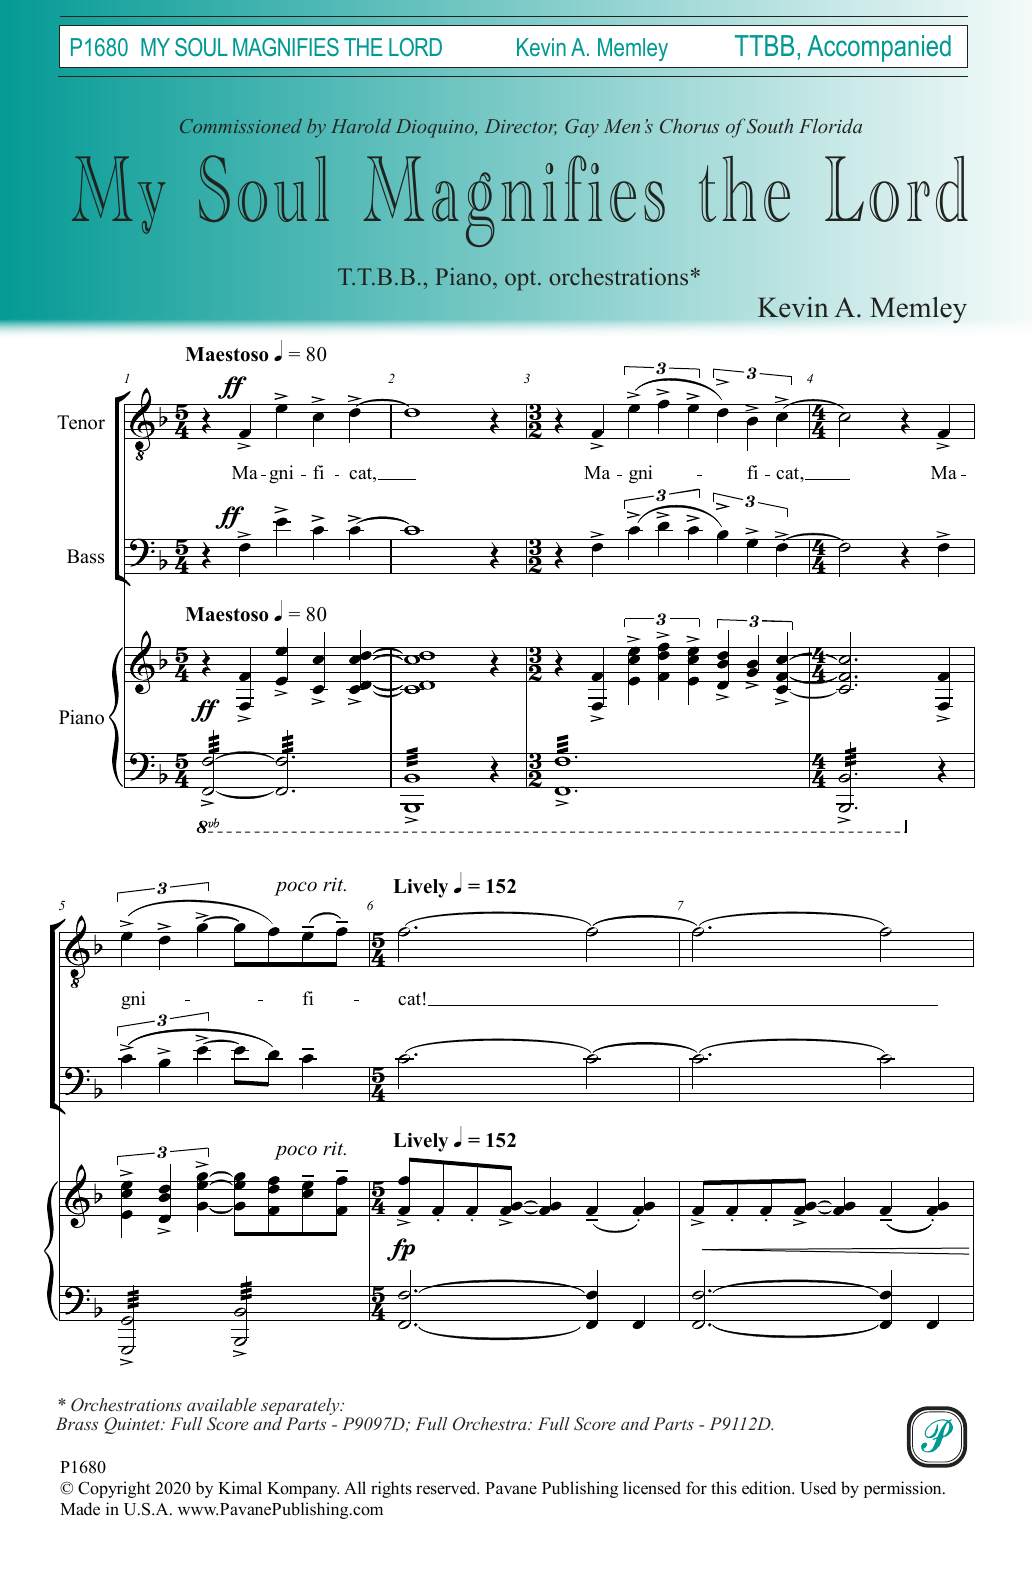 Download Kevin A. Memley My Soul Magnifies the Lord Sheet Music